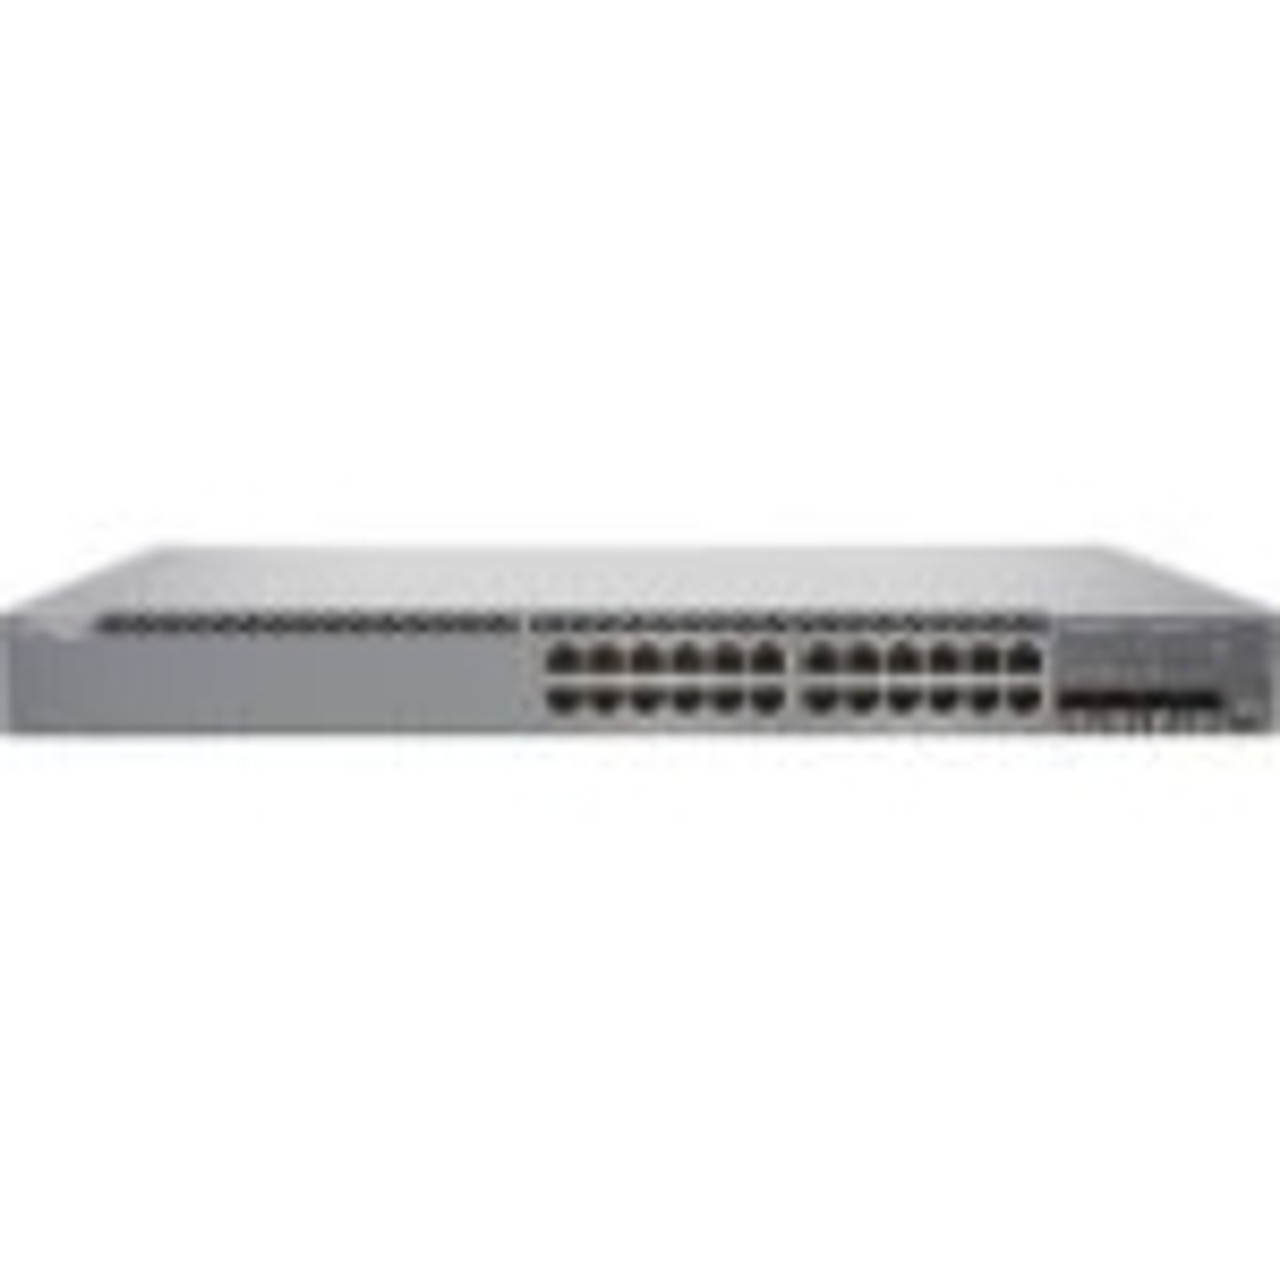 EX3400-24T-TAA Juniper EX3400 Taa 24-Ports 10/100/1000Base-T Managed Switch with 4x 10Gbps SFP/SFP+ Ports (Refurbished)